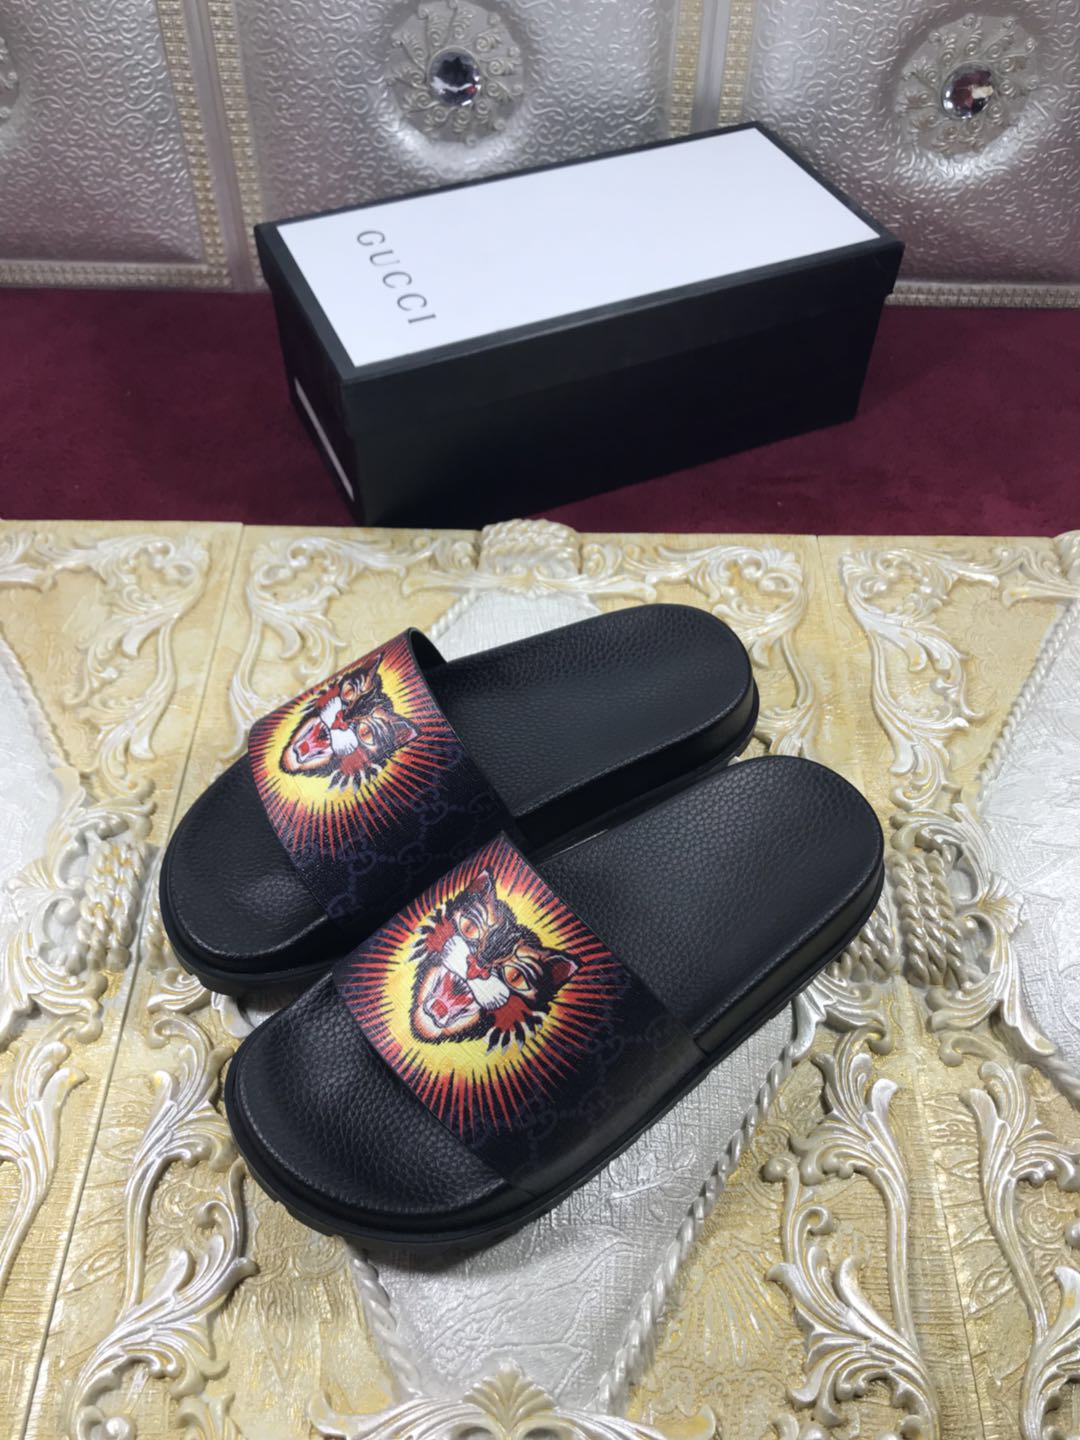 Gucci Slide Sandals with Angry Cat OF_2812F2F6C9E0